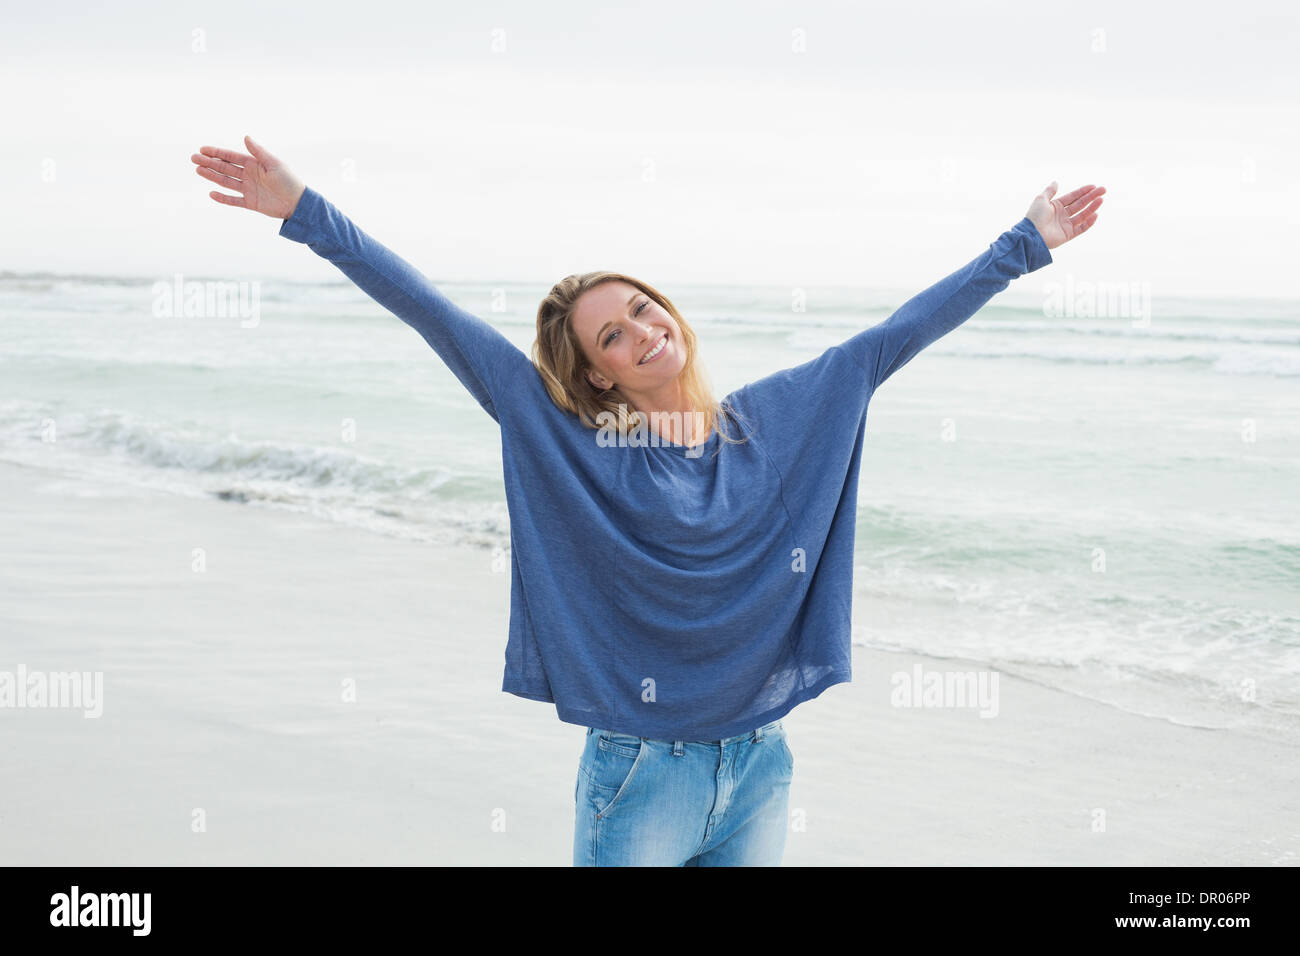 Happy woman with hands raised at beach Stock Photo